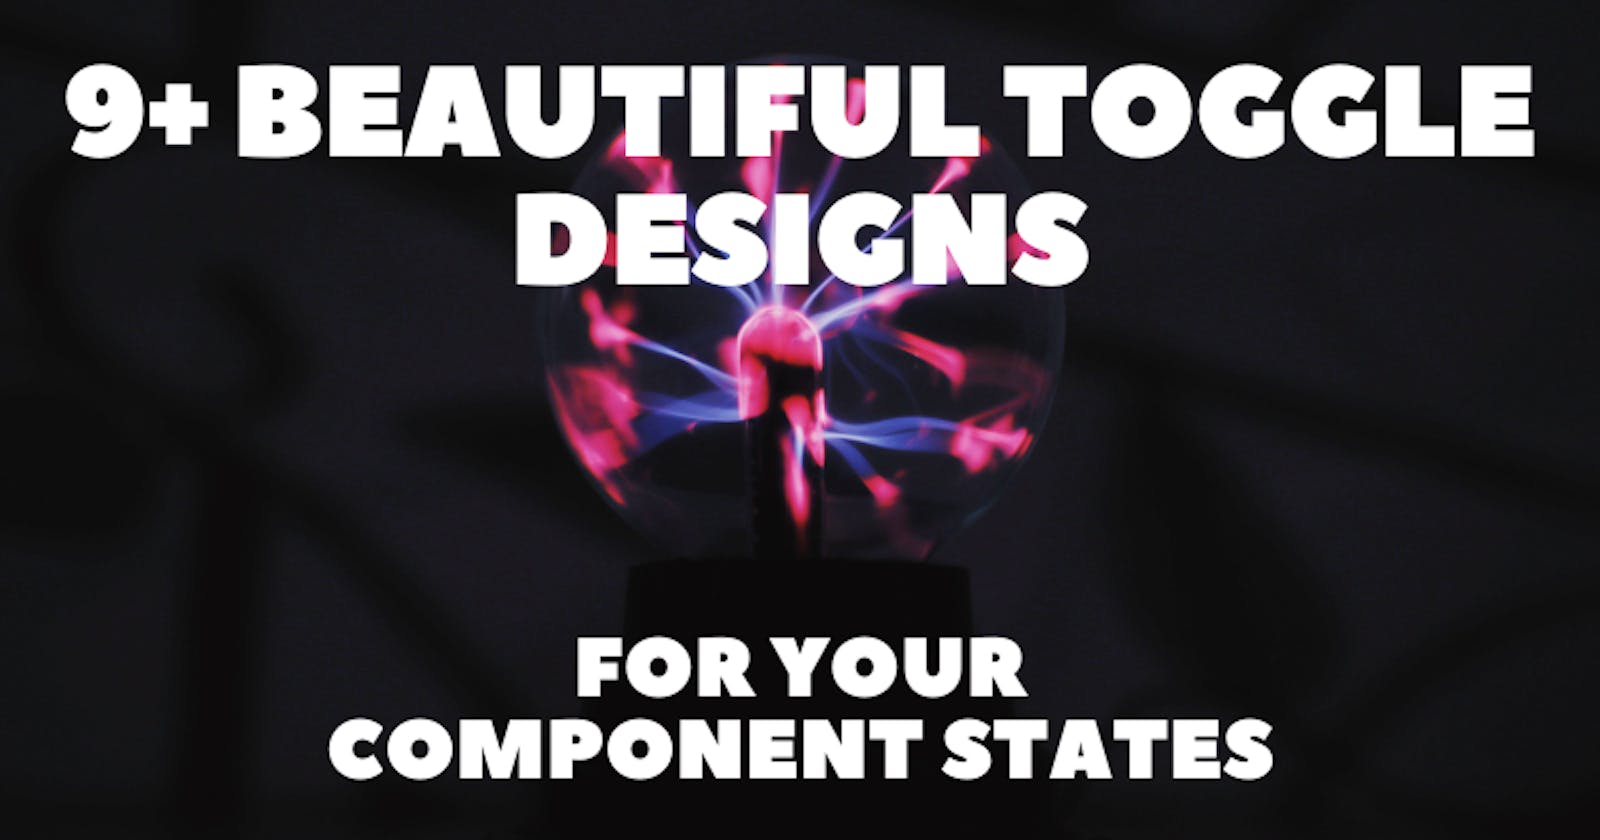 9+ Beautiful Toggle Designs for Your Component States 😍✨